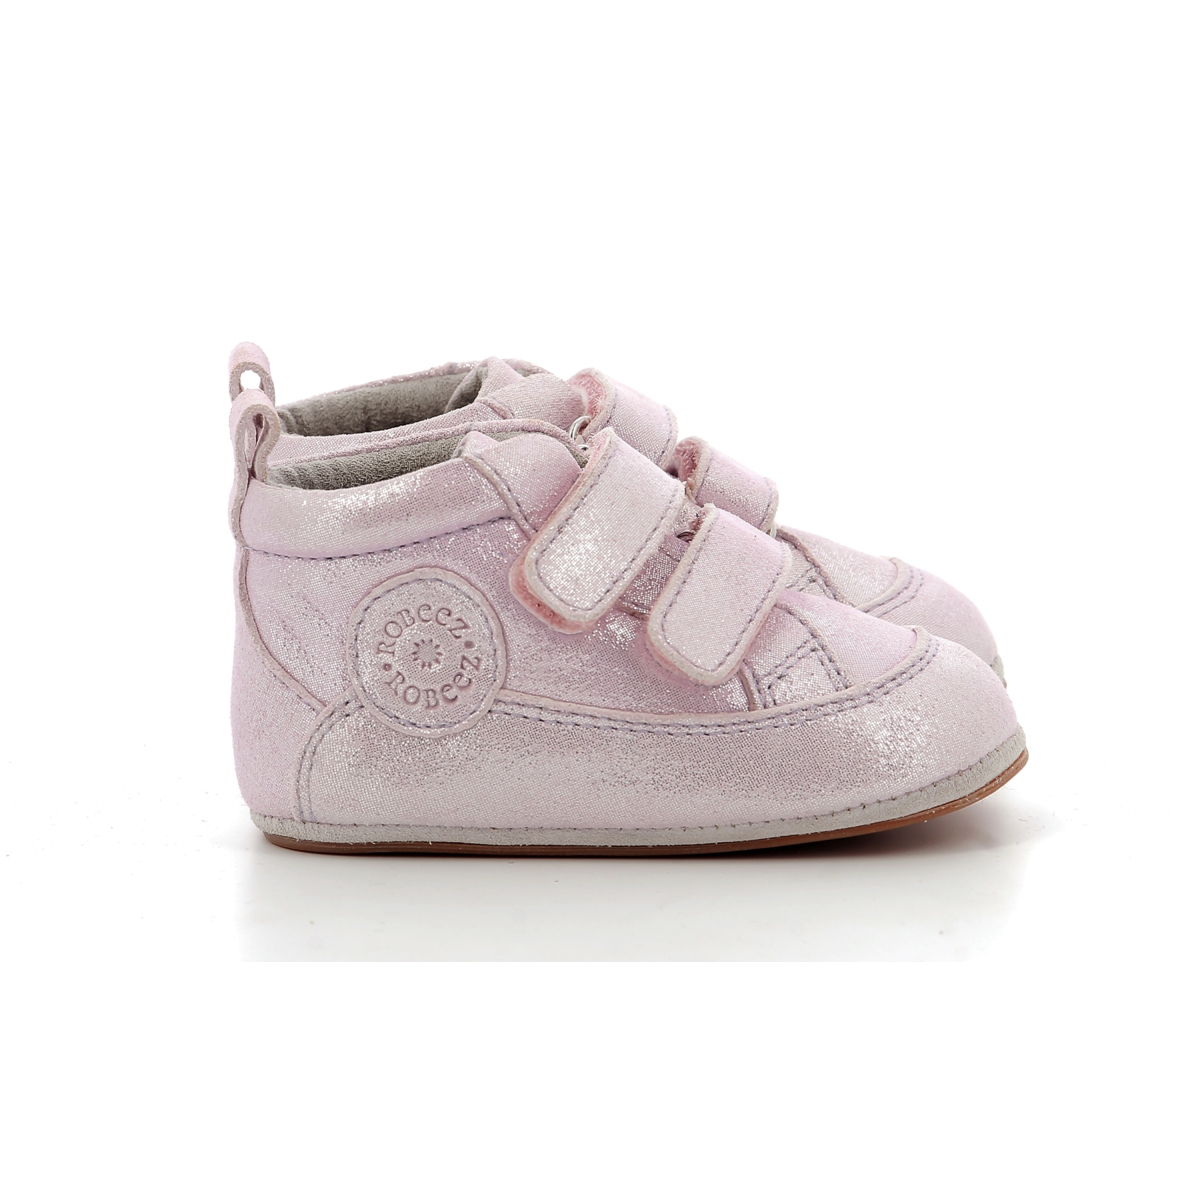 Chaussons bébé fille Robeez Wheasle Girl - Robeez - Chaussures